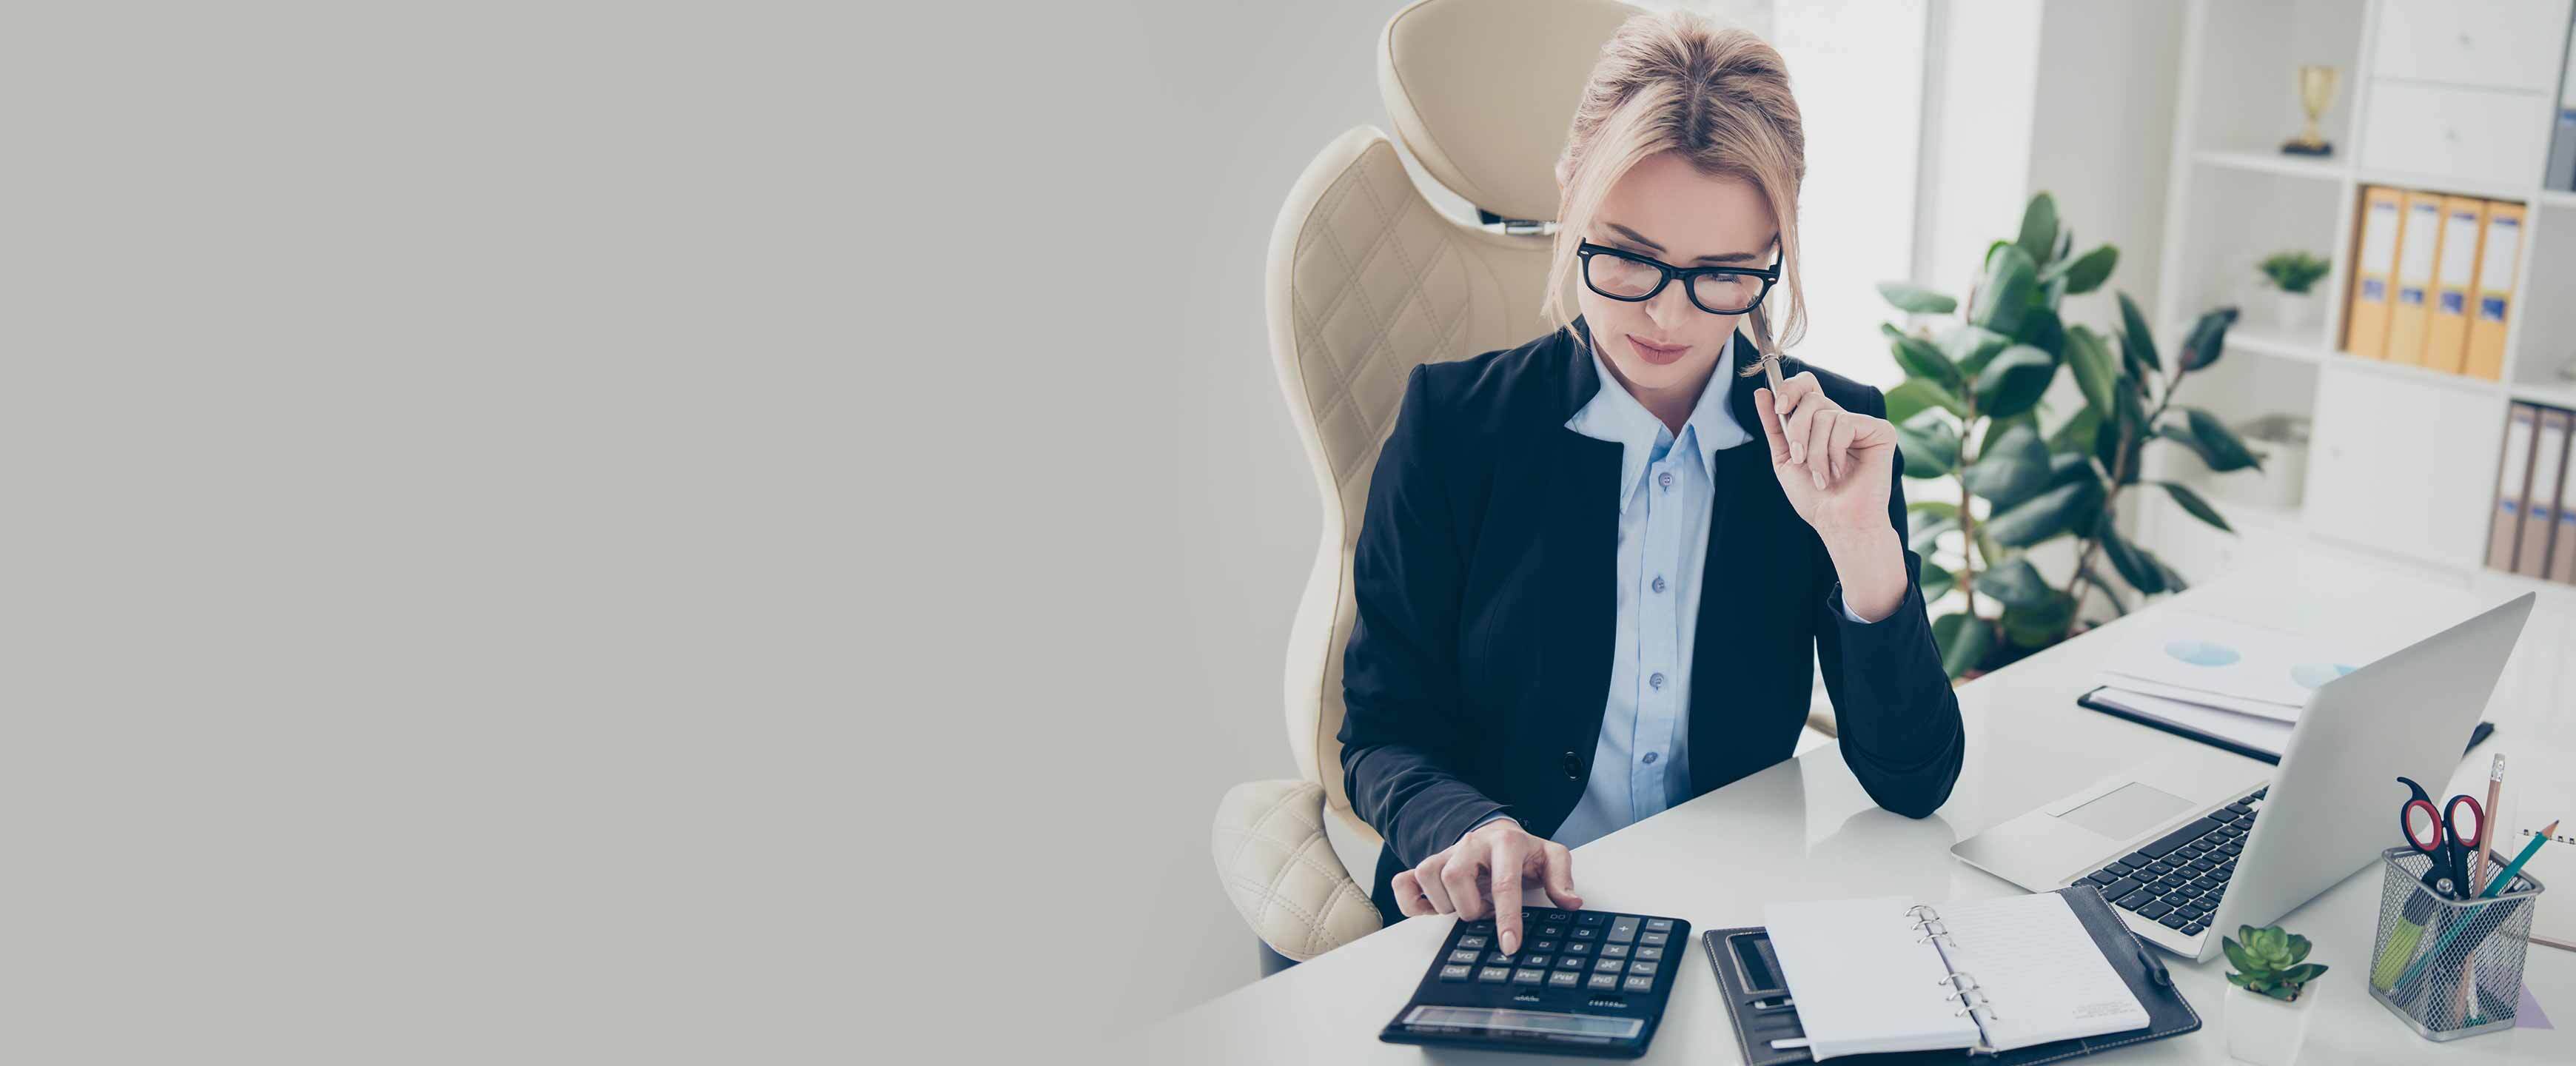 Portrait of busy concentrated woman in eyewear counting on calculator with thoughtful expression wearing shirt jacket sitting in modern workplace having computer supplies on table